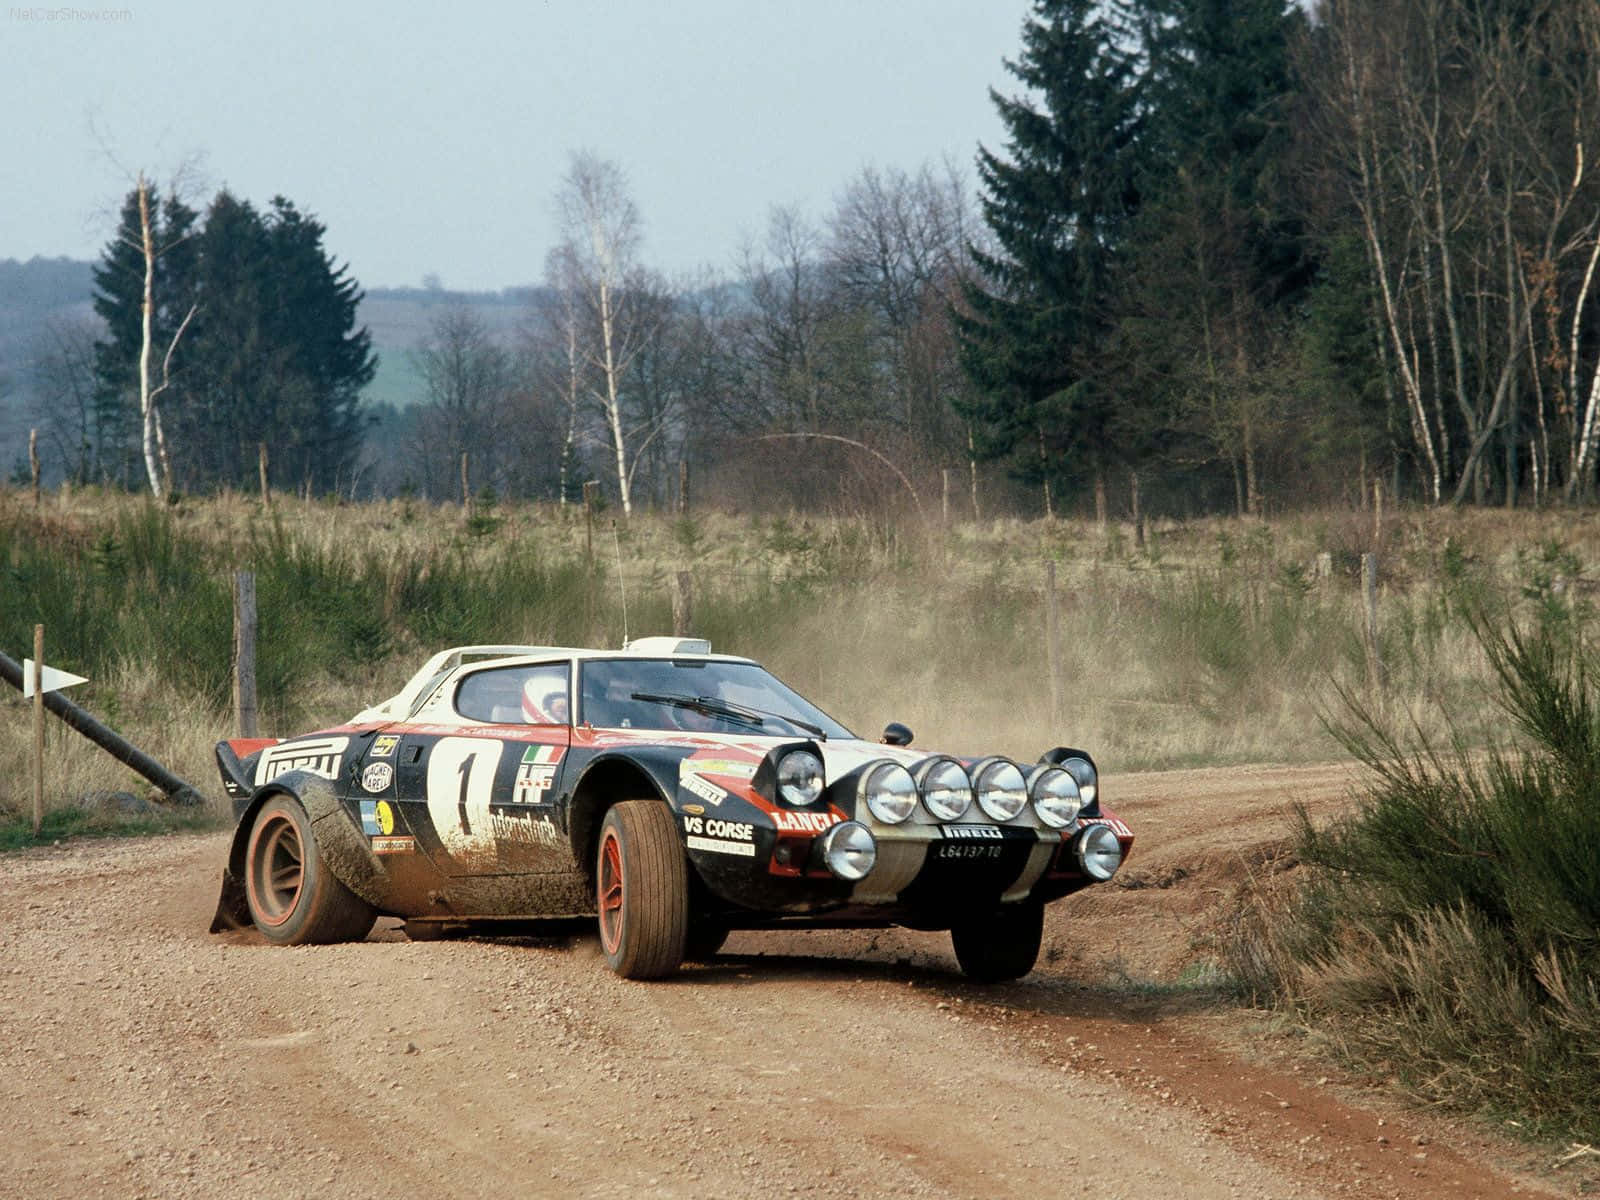 Caption: Classic Lancia Driving on Open Road Wallpaper